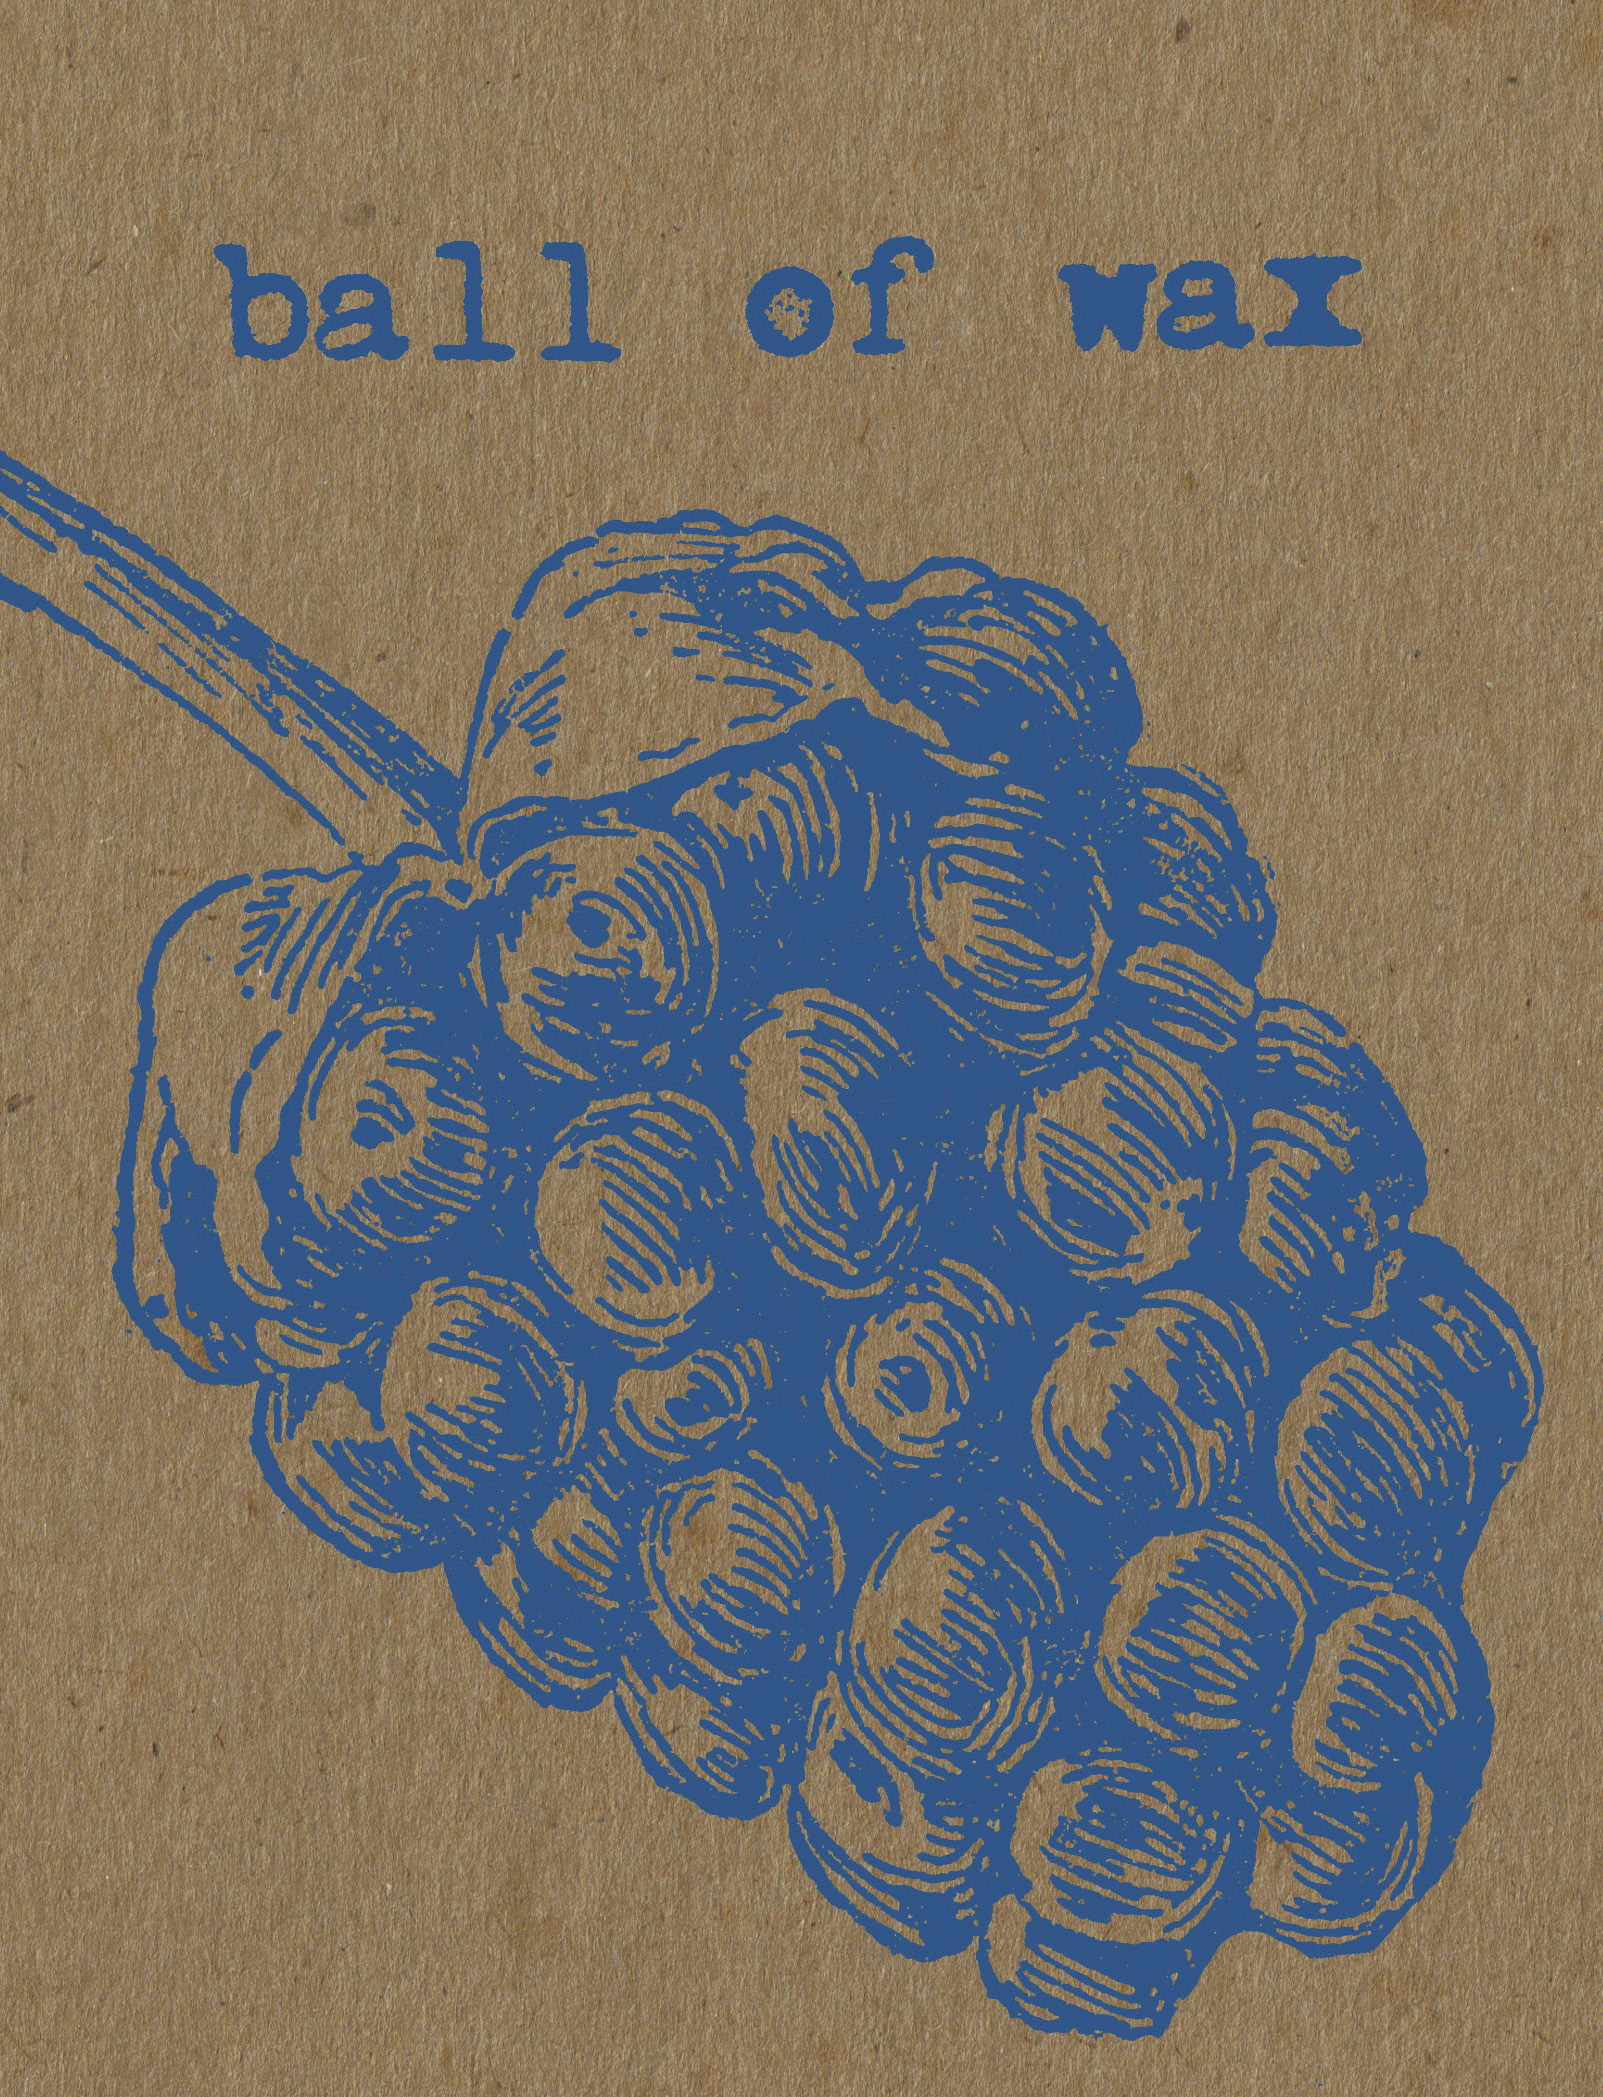 Ball of Wax Volume 31: Covers!, featuring Shenandoah Davis, is out now.